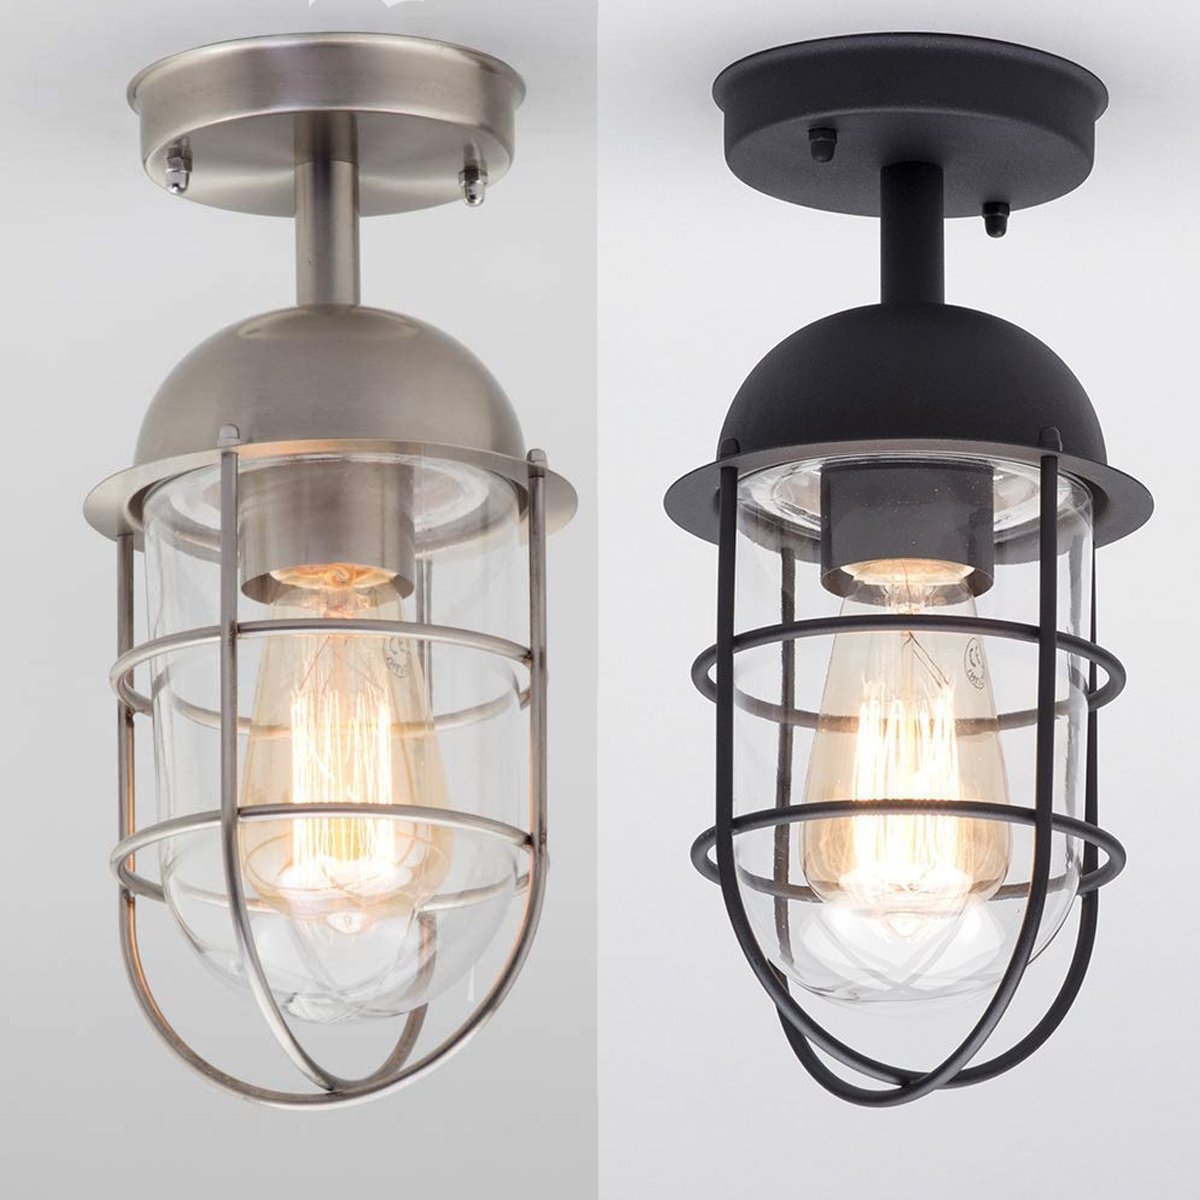 Fishermans Style Cage Light – Choice Of Colours Black – Ceiling Light – CGC Retail Outlet